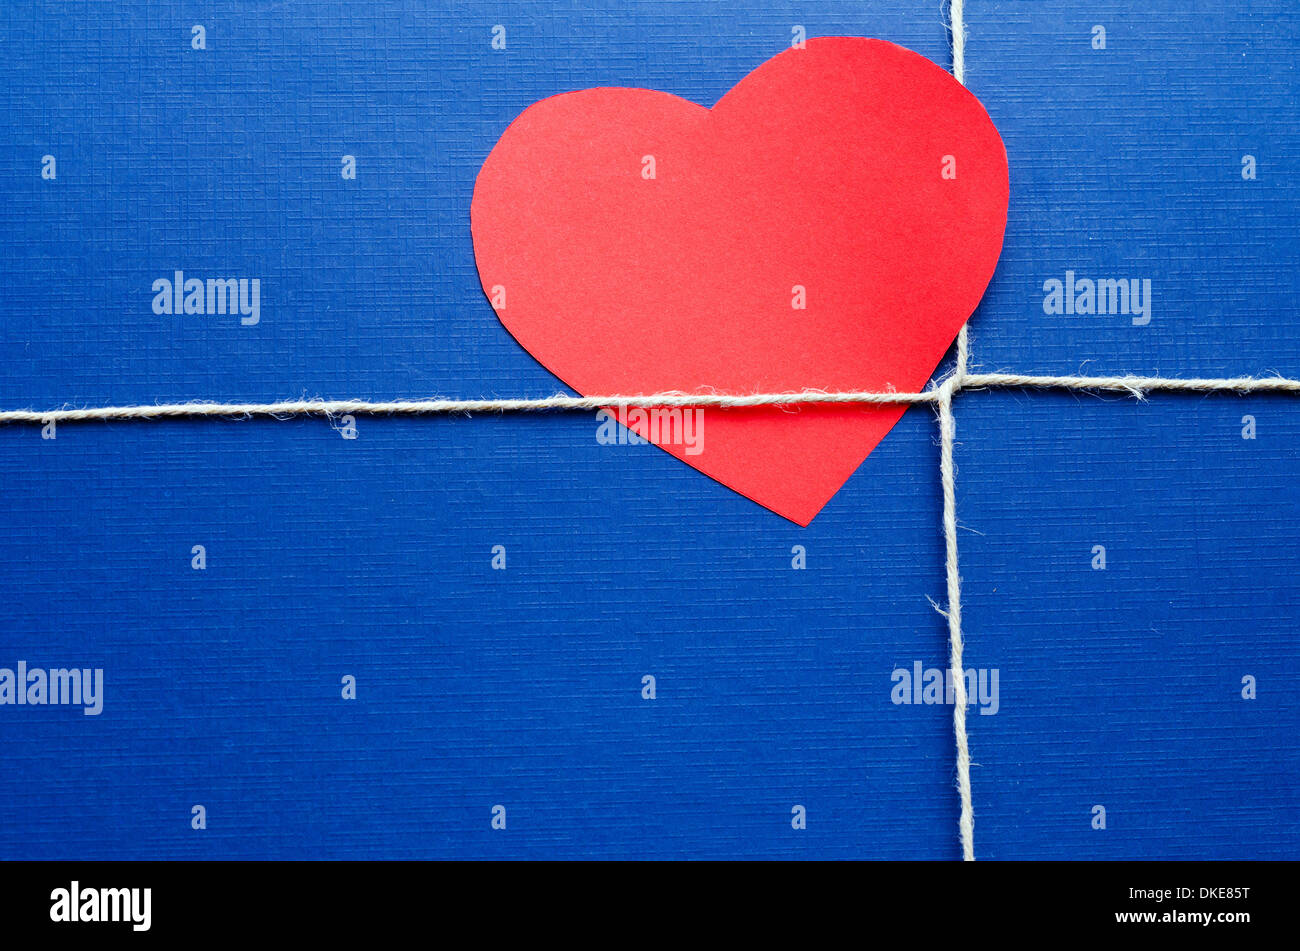 Blue paper package or gift with red heart shape valentine card. Stock Photo